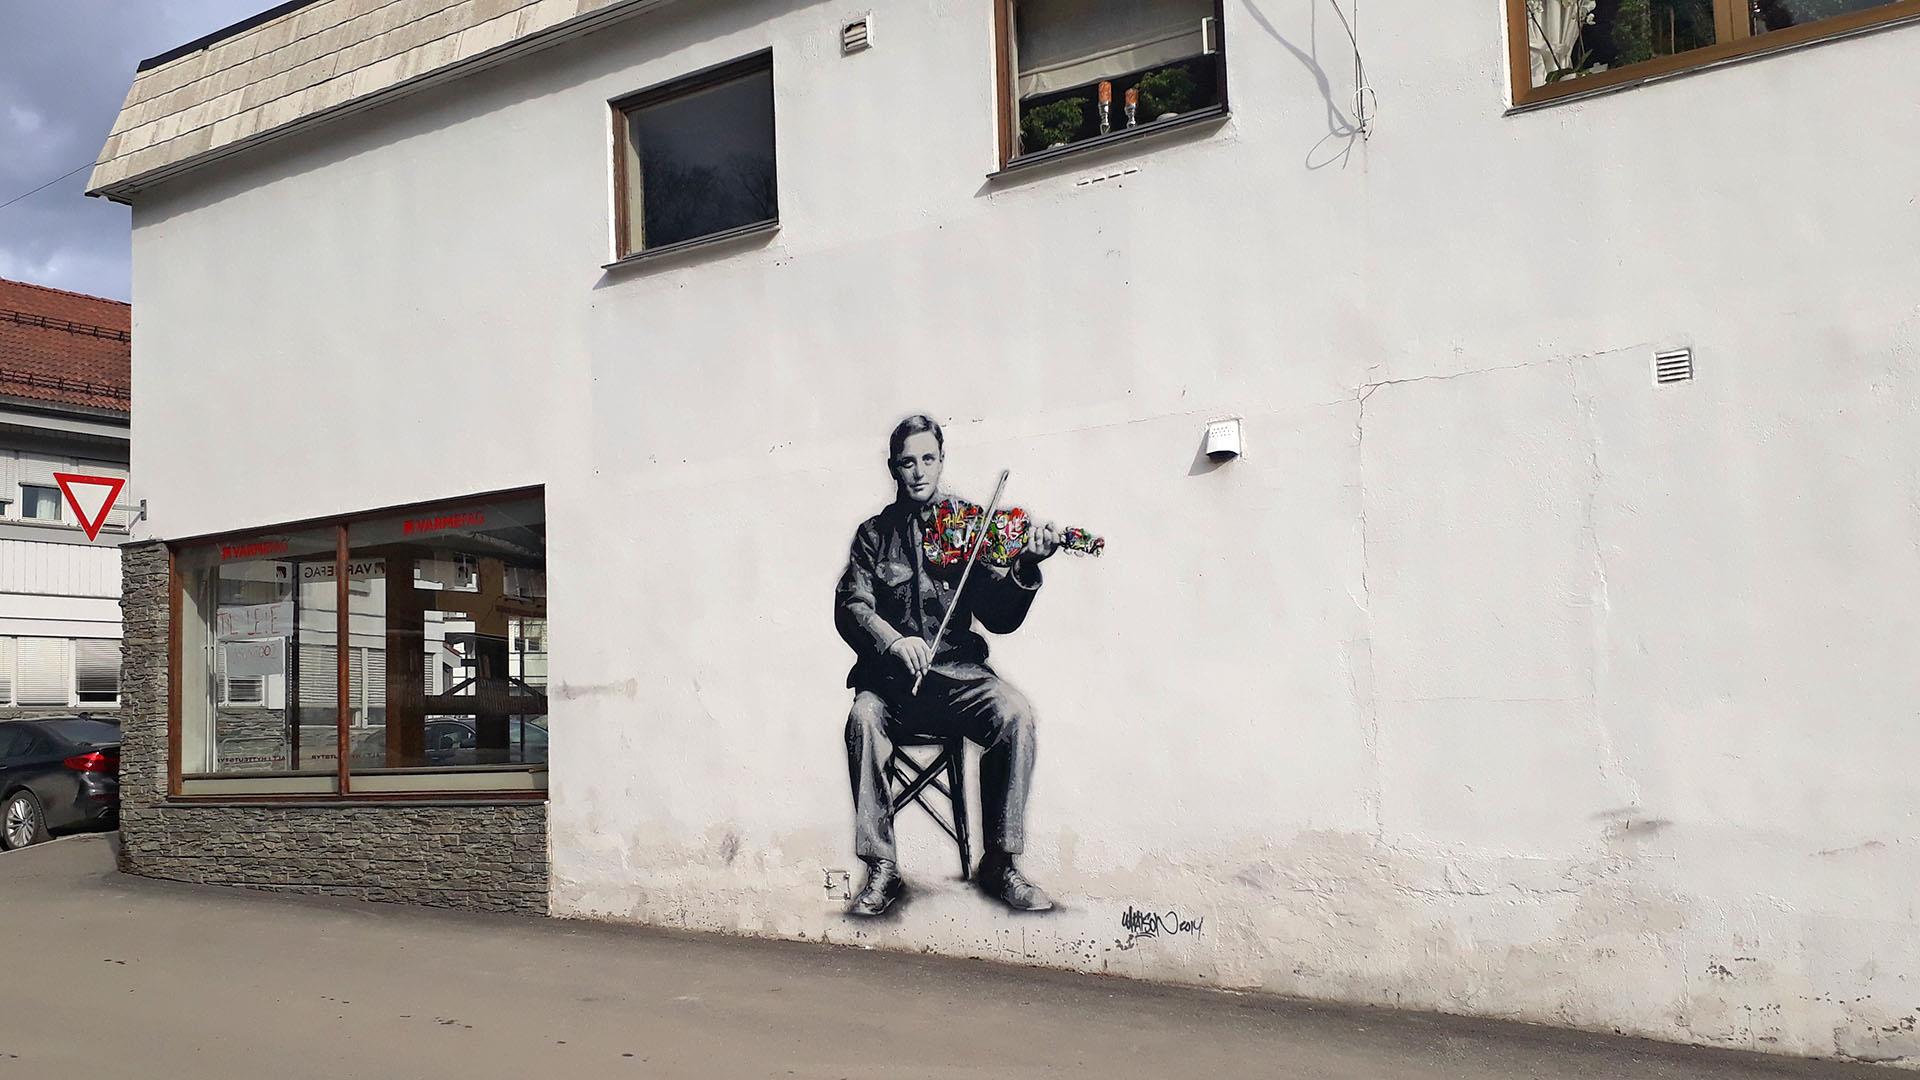 Street art at Fagernes showing a folk musician with a Hardanger fiddle.